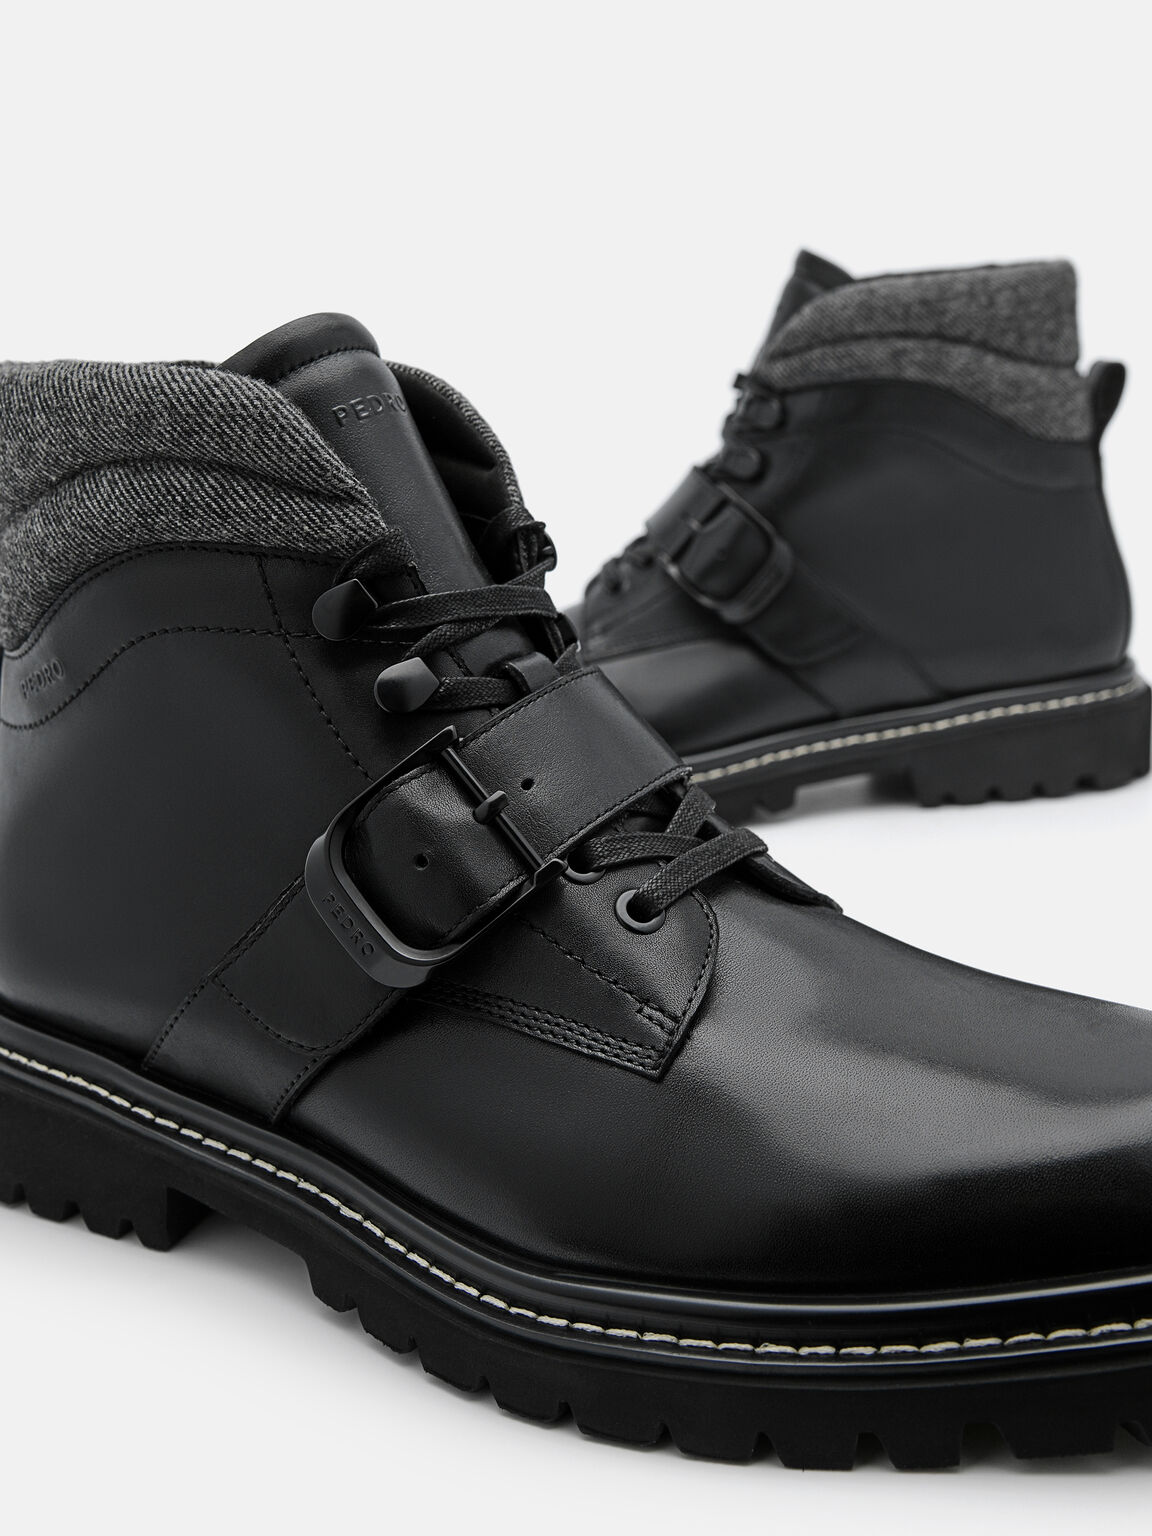 Helix Leather Boots, Black